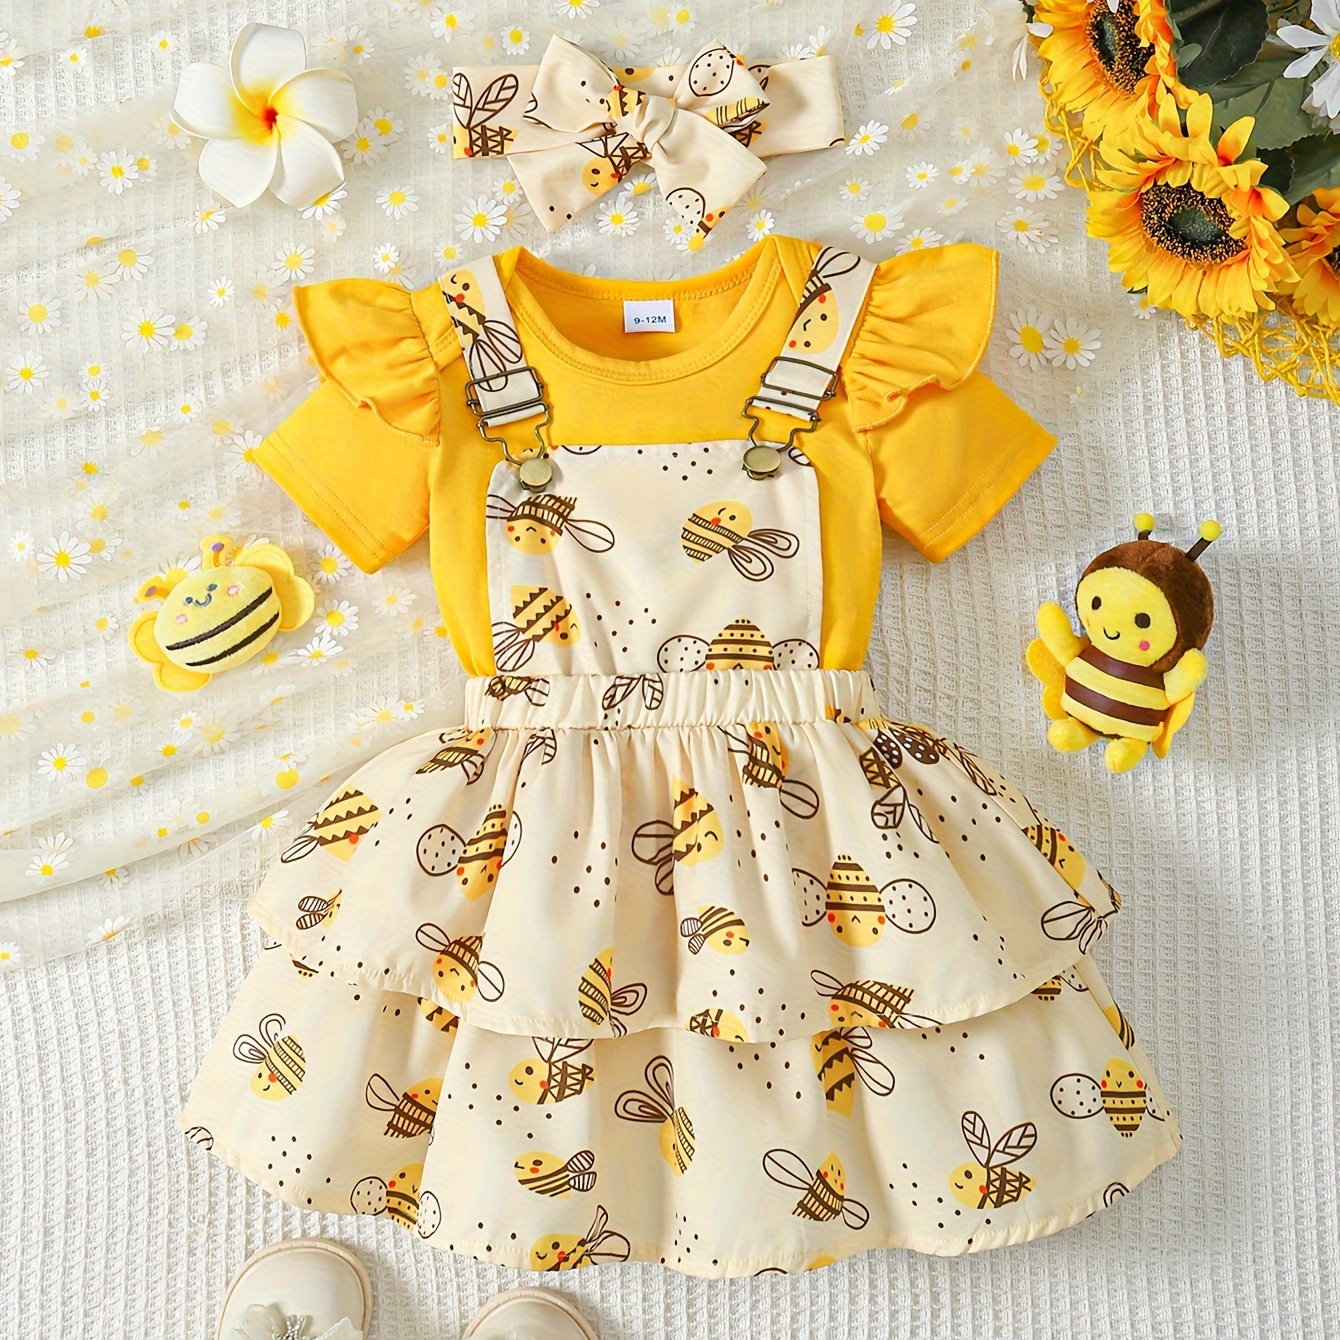 

Baby's Cartoon Bee Pattern 2pcs Lovely Summer Outfit, Bodysuit & Hairband & Suspender Overall Layered Dress Set, Toddler & Infant Girl's Clothes For Daily/holiday/party